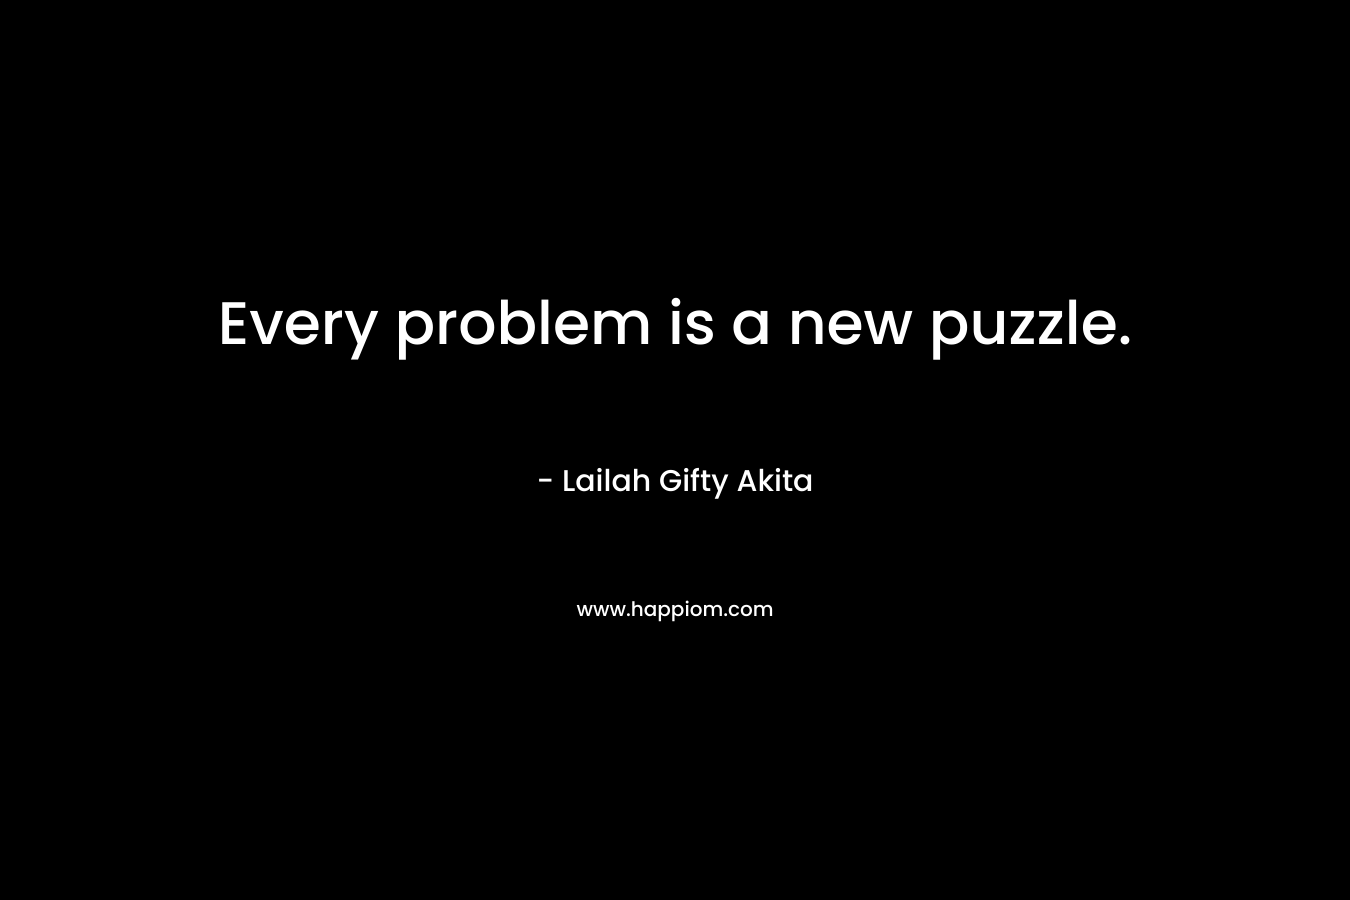 Every problem is a new puzzle. – Lailah Gifty Akita